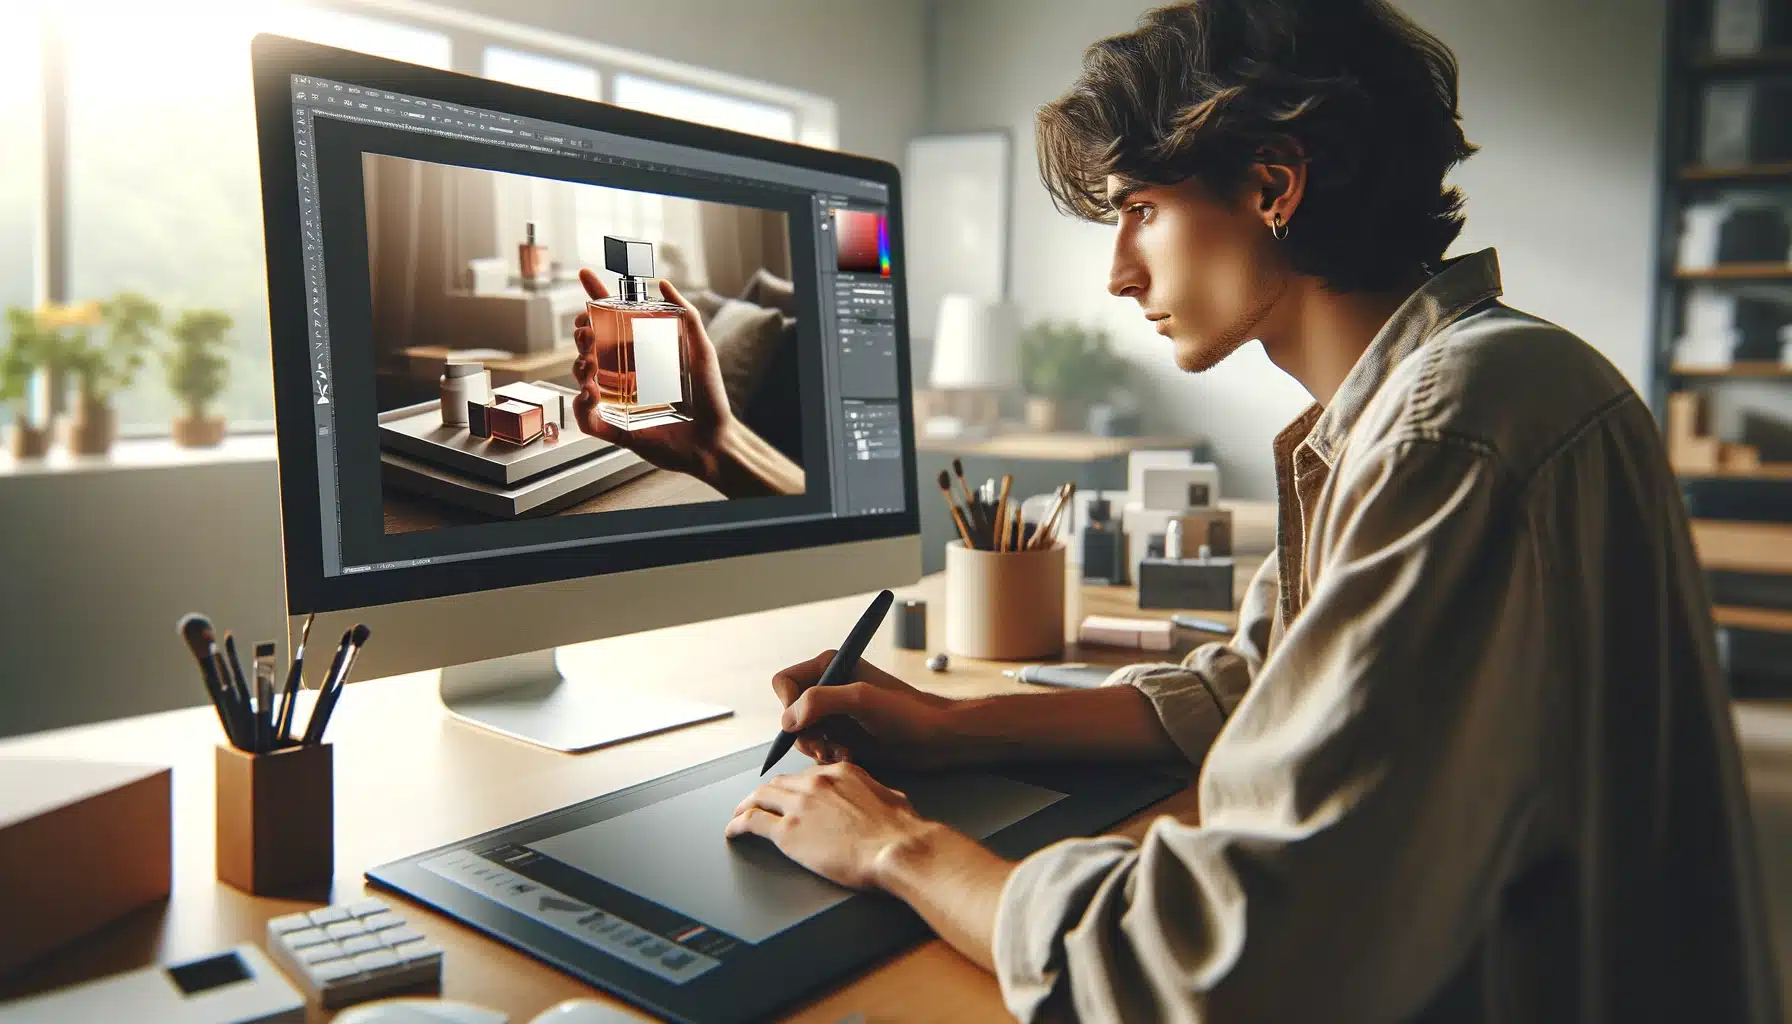 Graphic designer using Adobe Photoshop on a large monitor to edit a perfume photo in a modern, well-equipped office